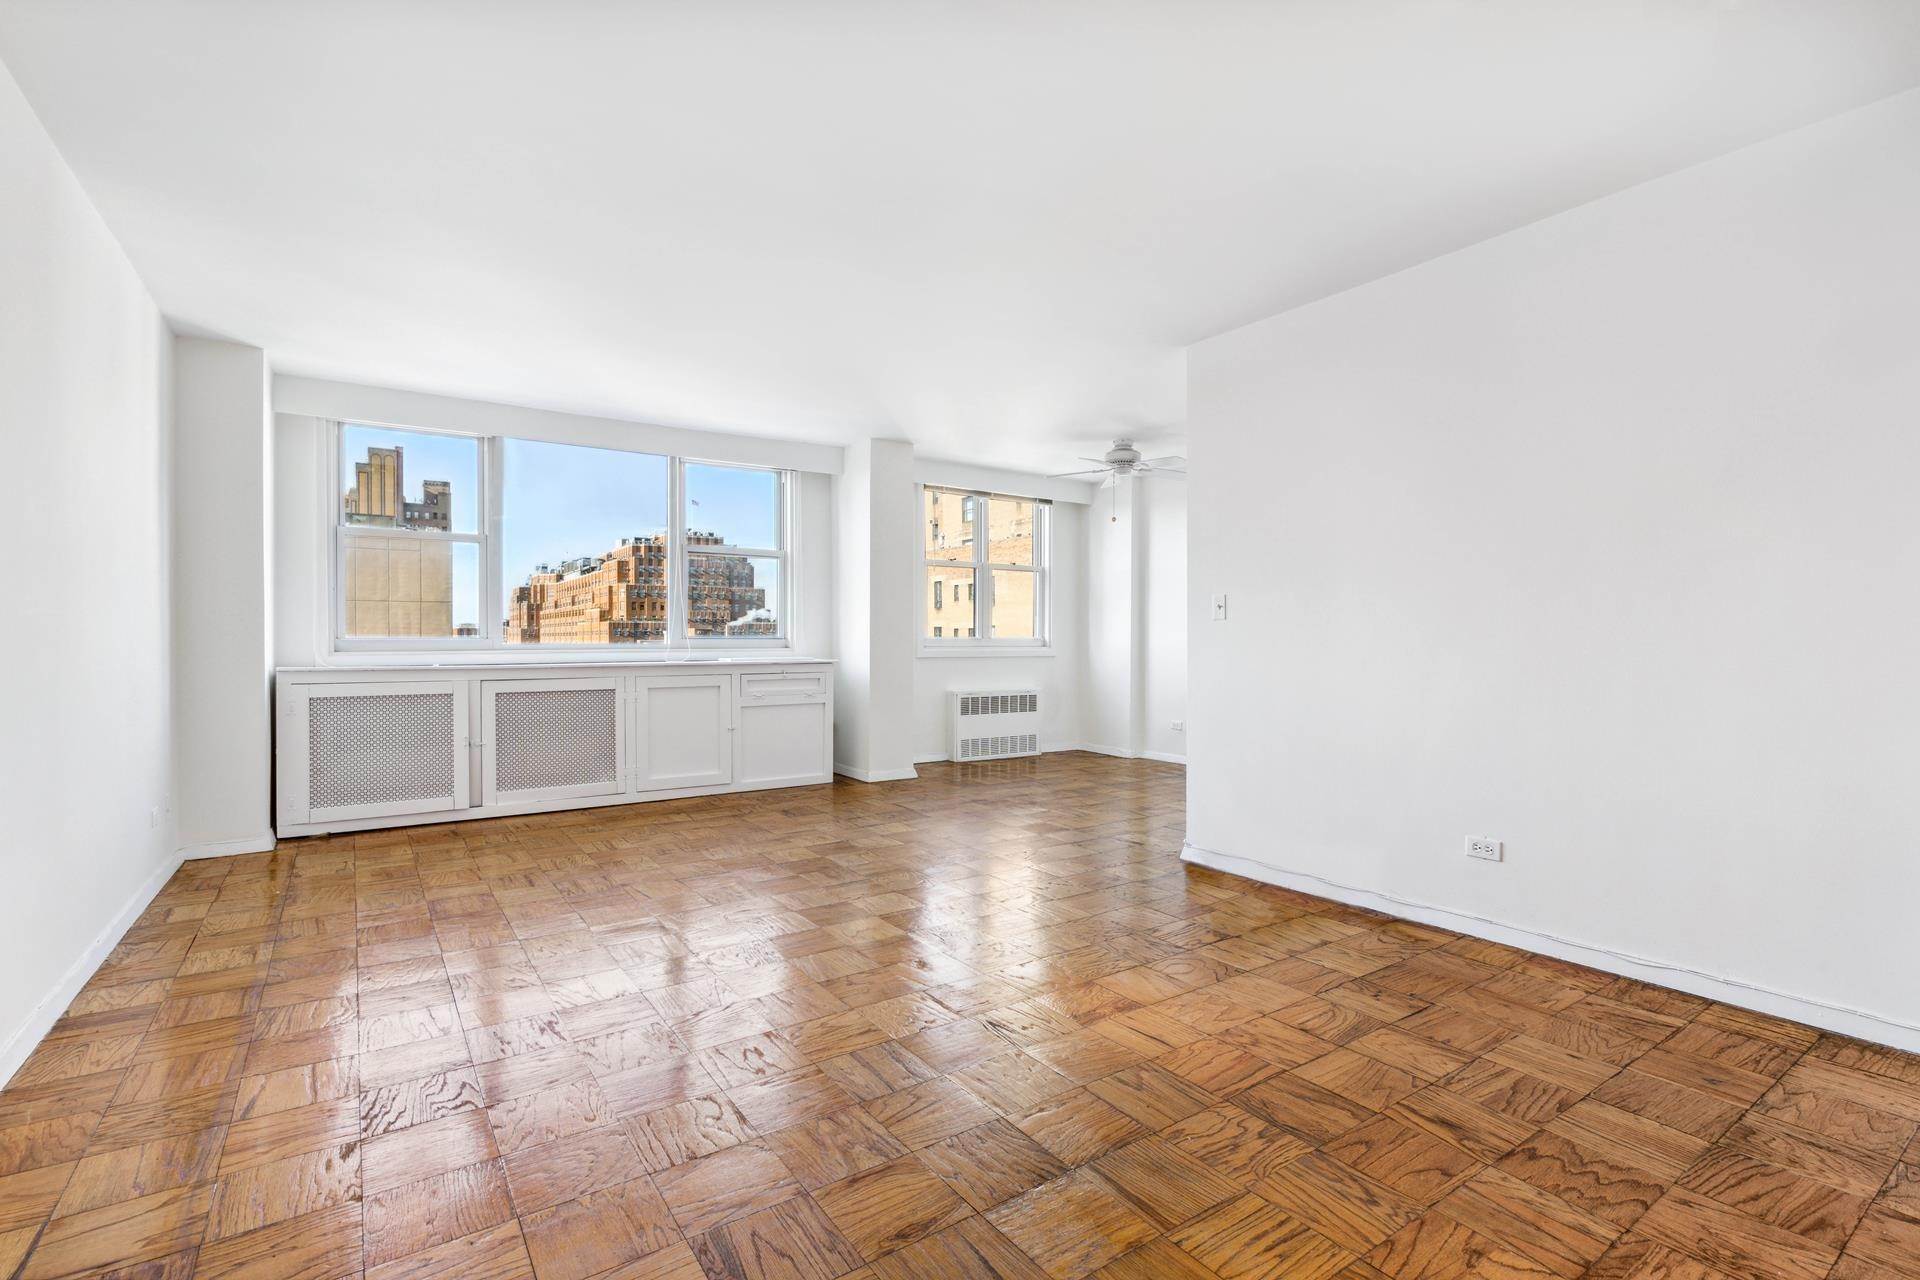 Cooperative for Sale at Chelsea, Manhattan, NY 10011